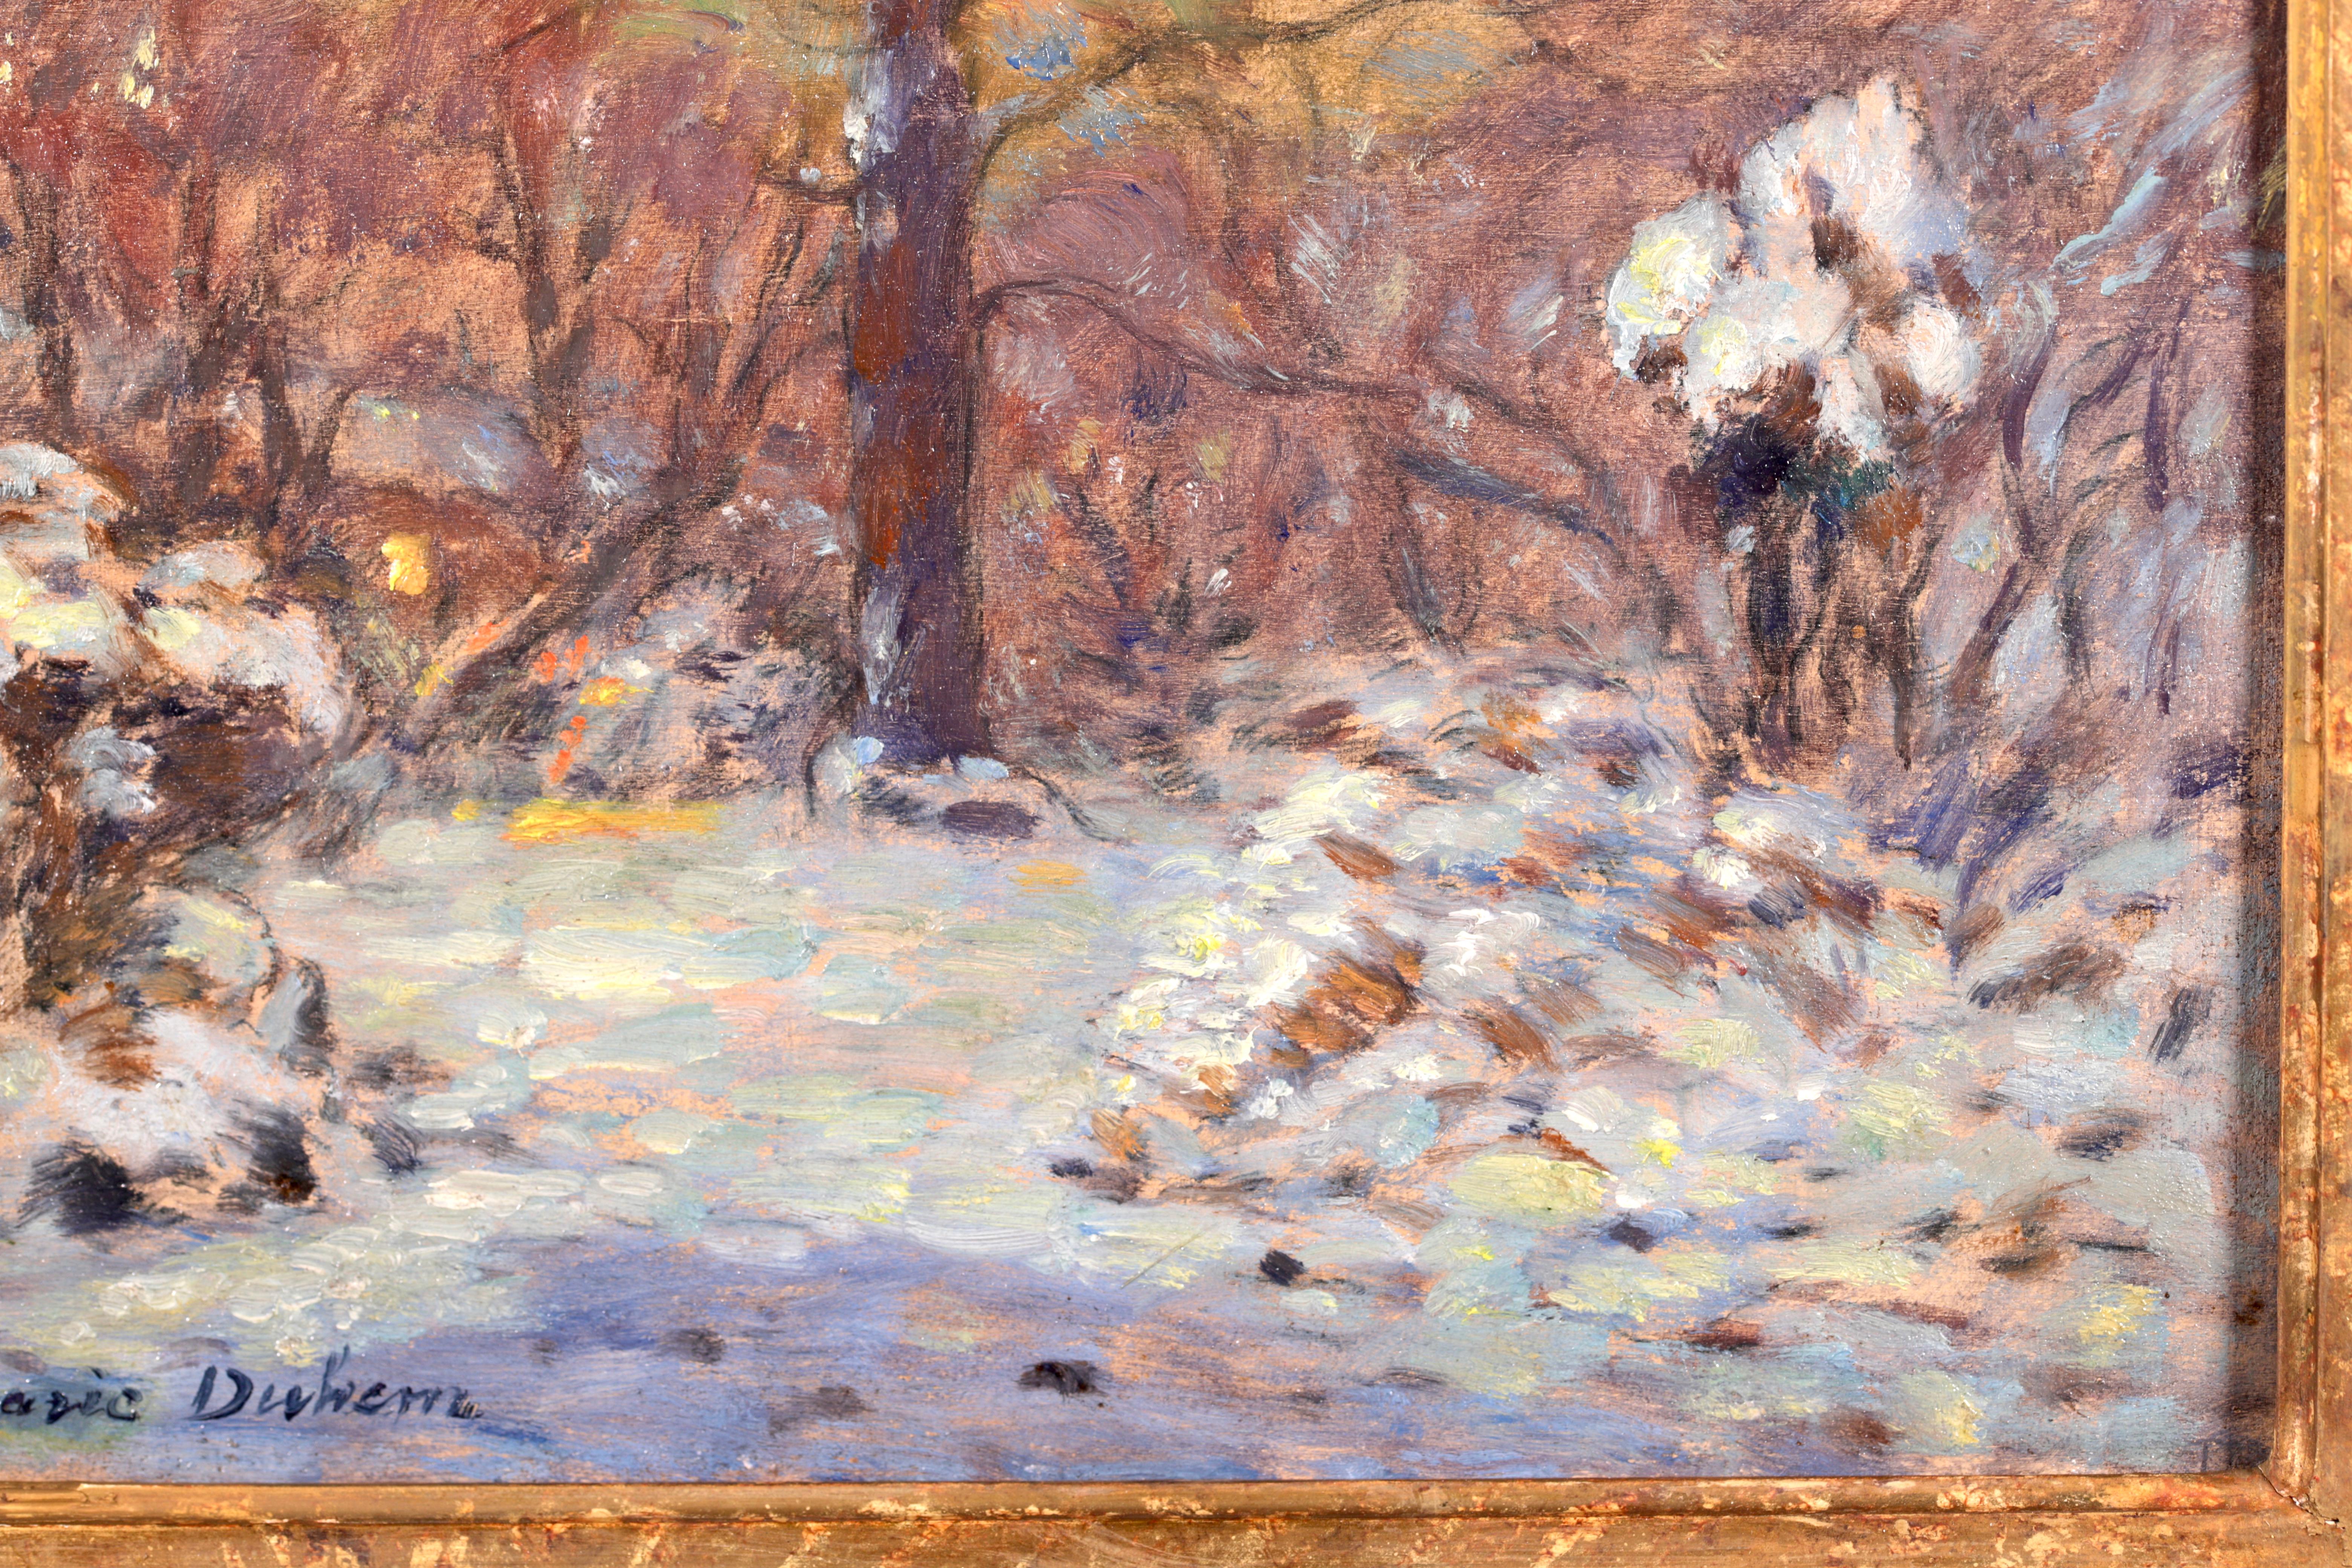 Flowers in Snow - Impressionist Oil, Snowy Winter Landscape by Marie Duhem 2